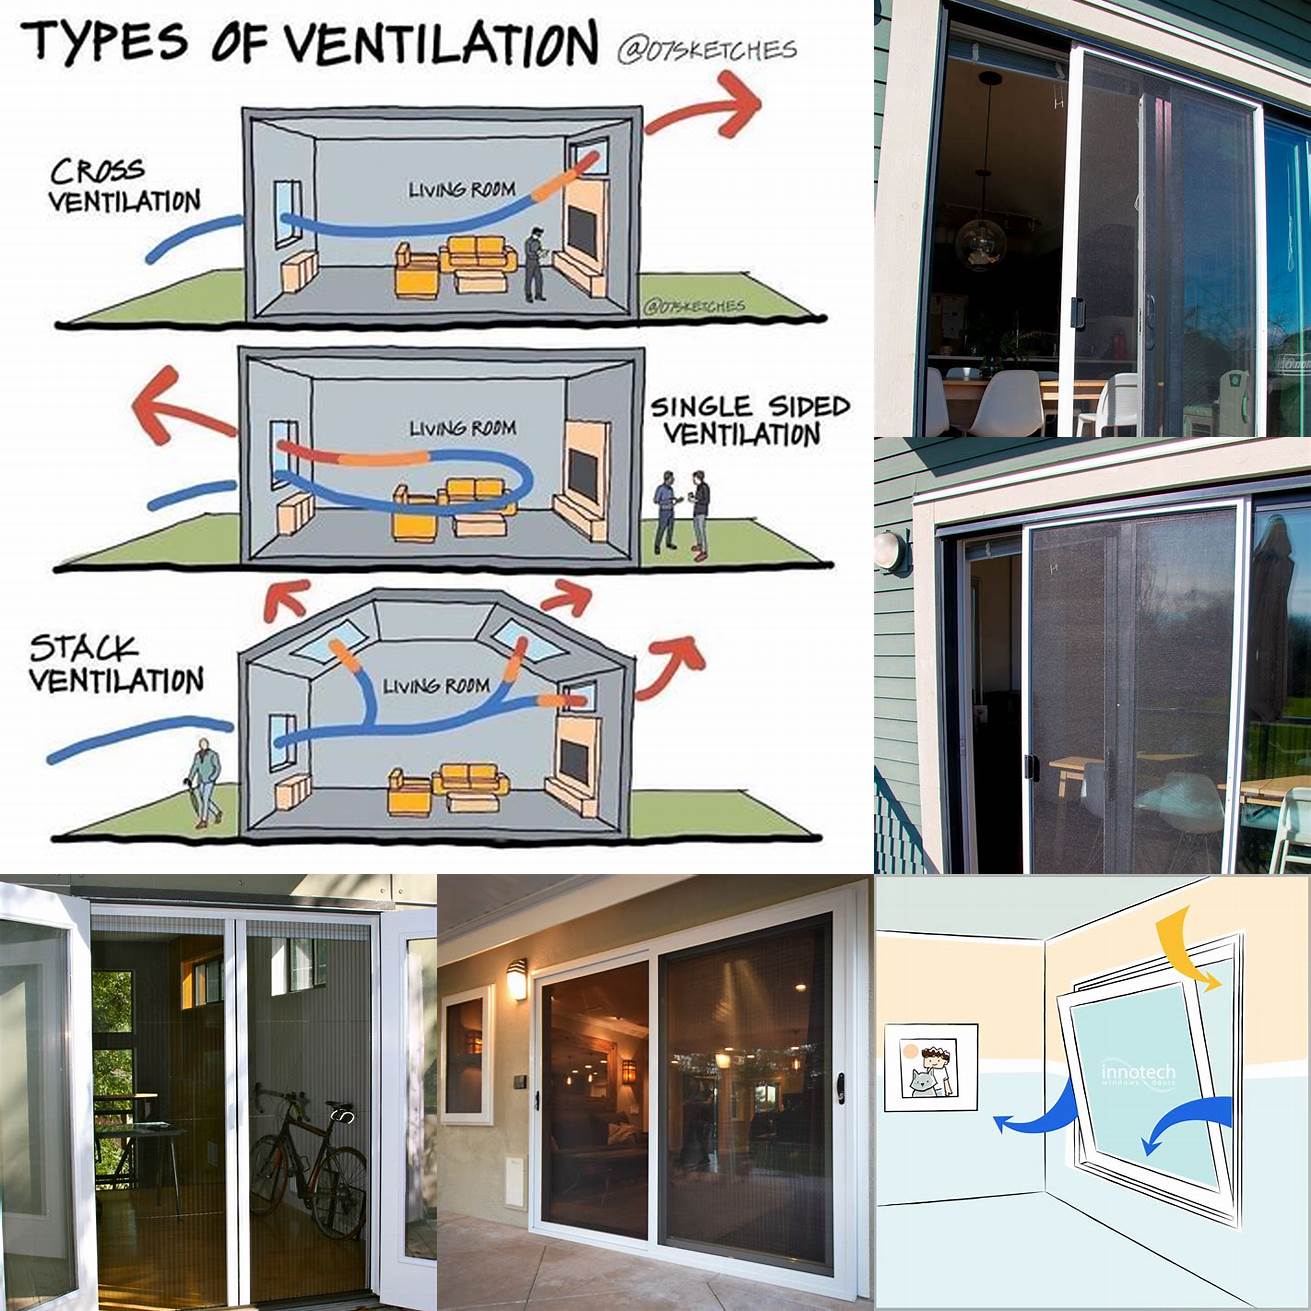 Energy efficiency By allowing natural ventilation sliding screen doors can help reduce the need for air conditioning thus reducing energy consumption and costs